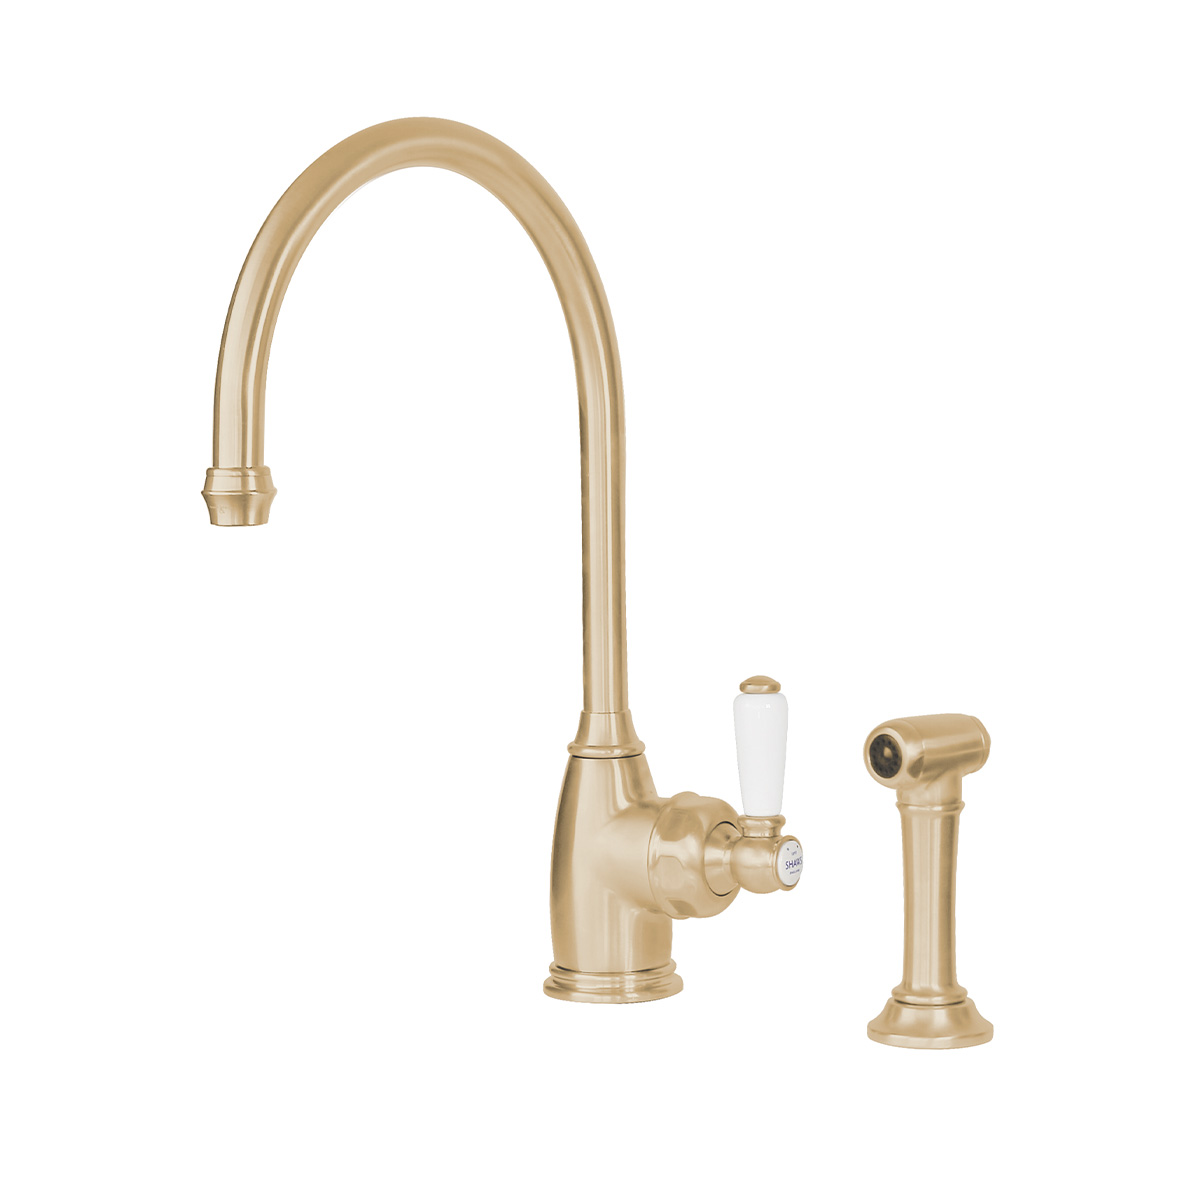 Shaws by Perrin & Rowe Yarrow kitchen mixer with spray rinse in Satin Brass. Parthian style monobloc kitchen tap AUSH.4346. Distributed in Australia by Luxe by Design, Brisbane.